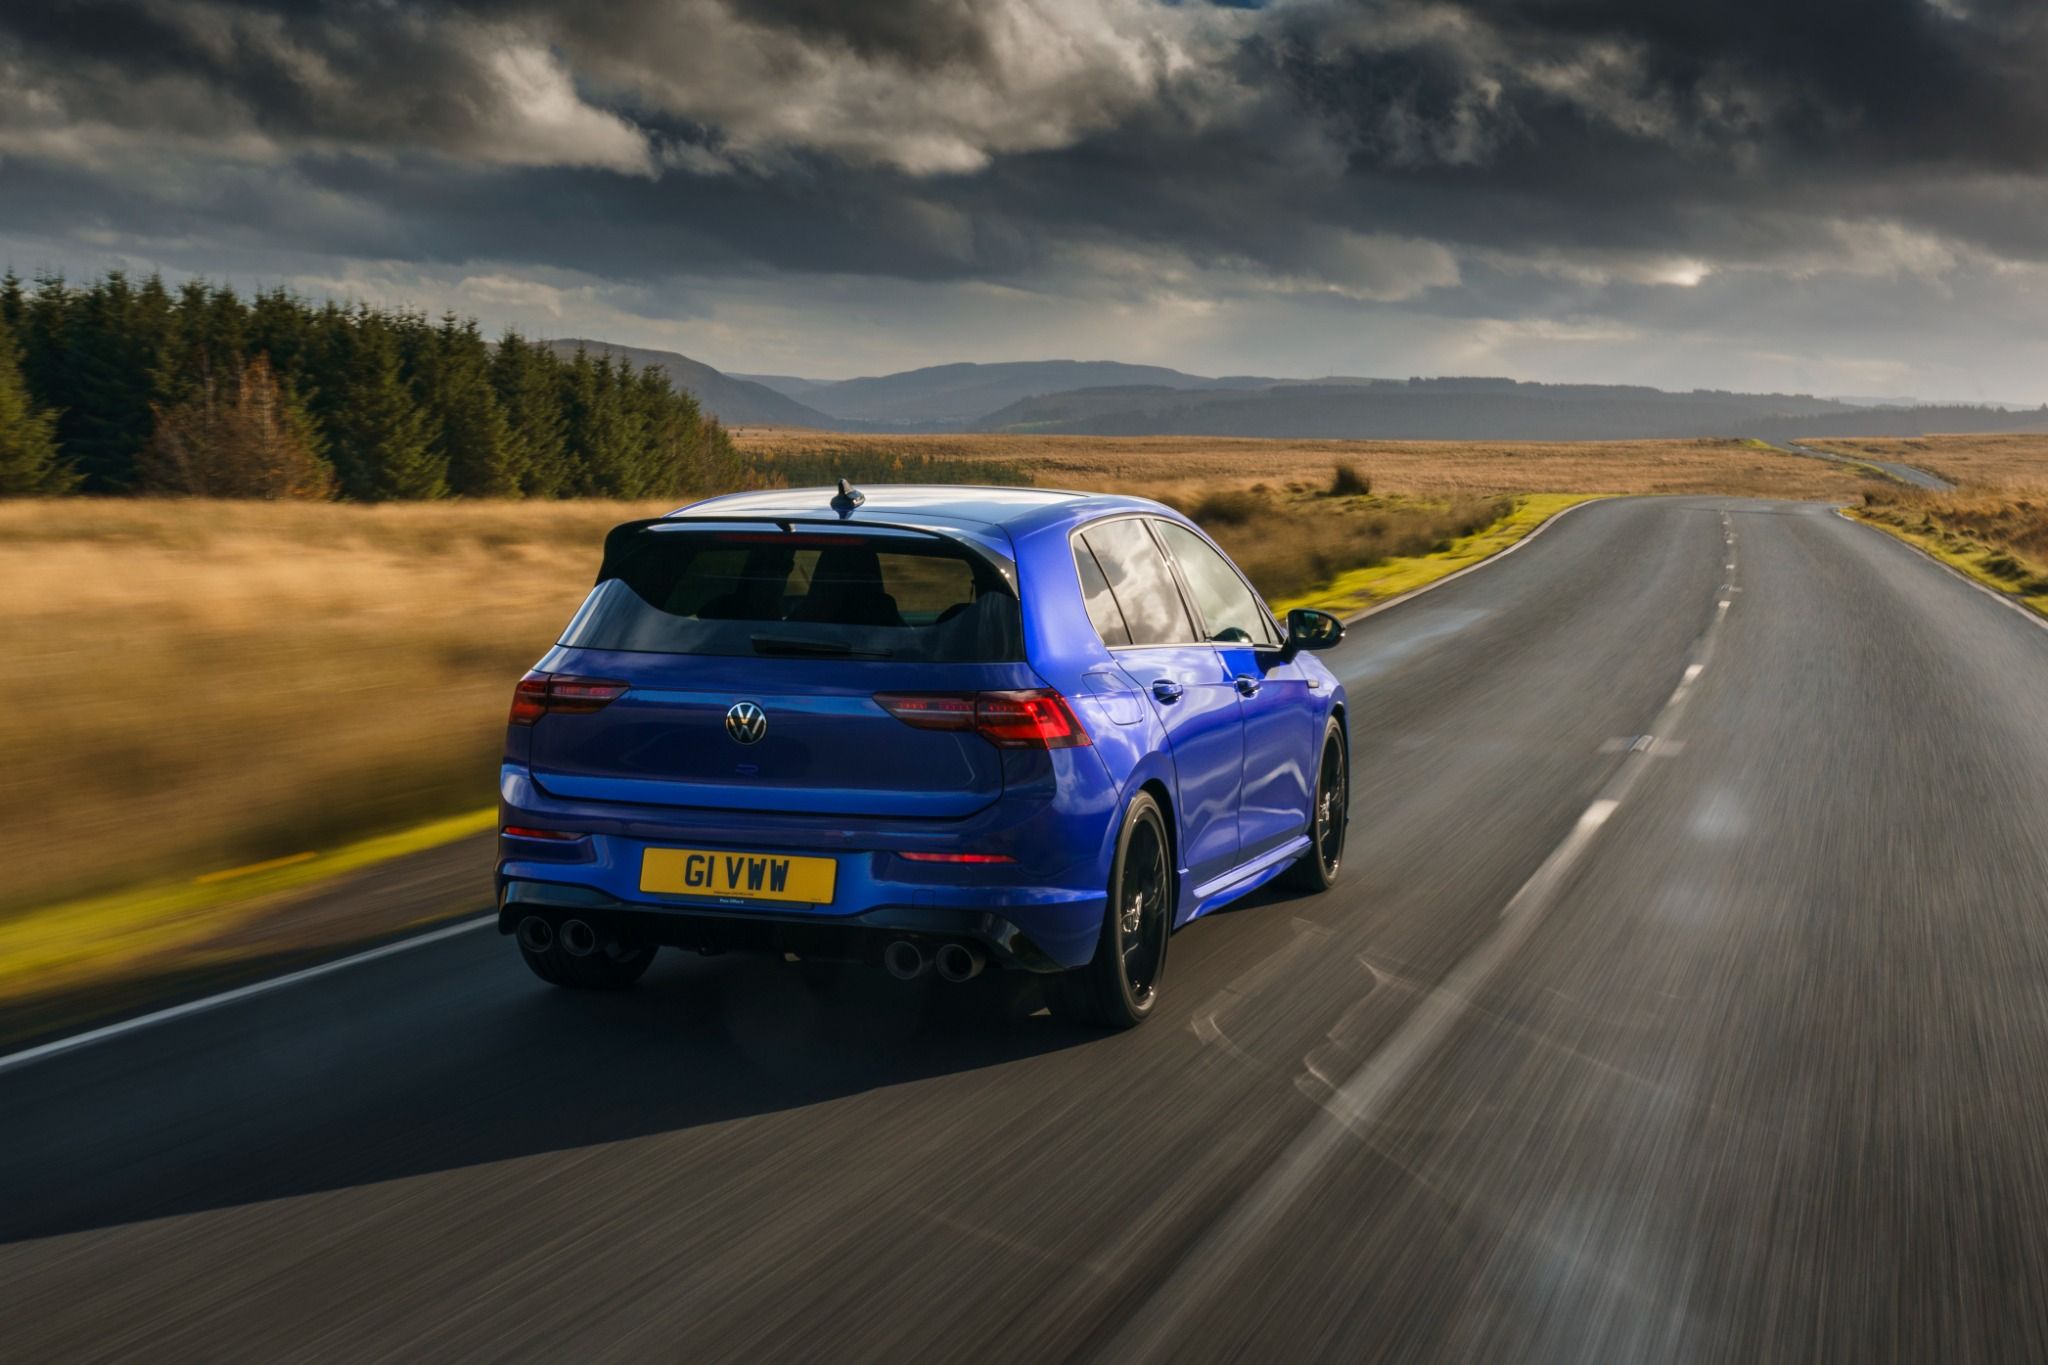 Rear view of Volkswagen Golf R driving on a road